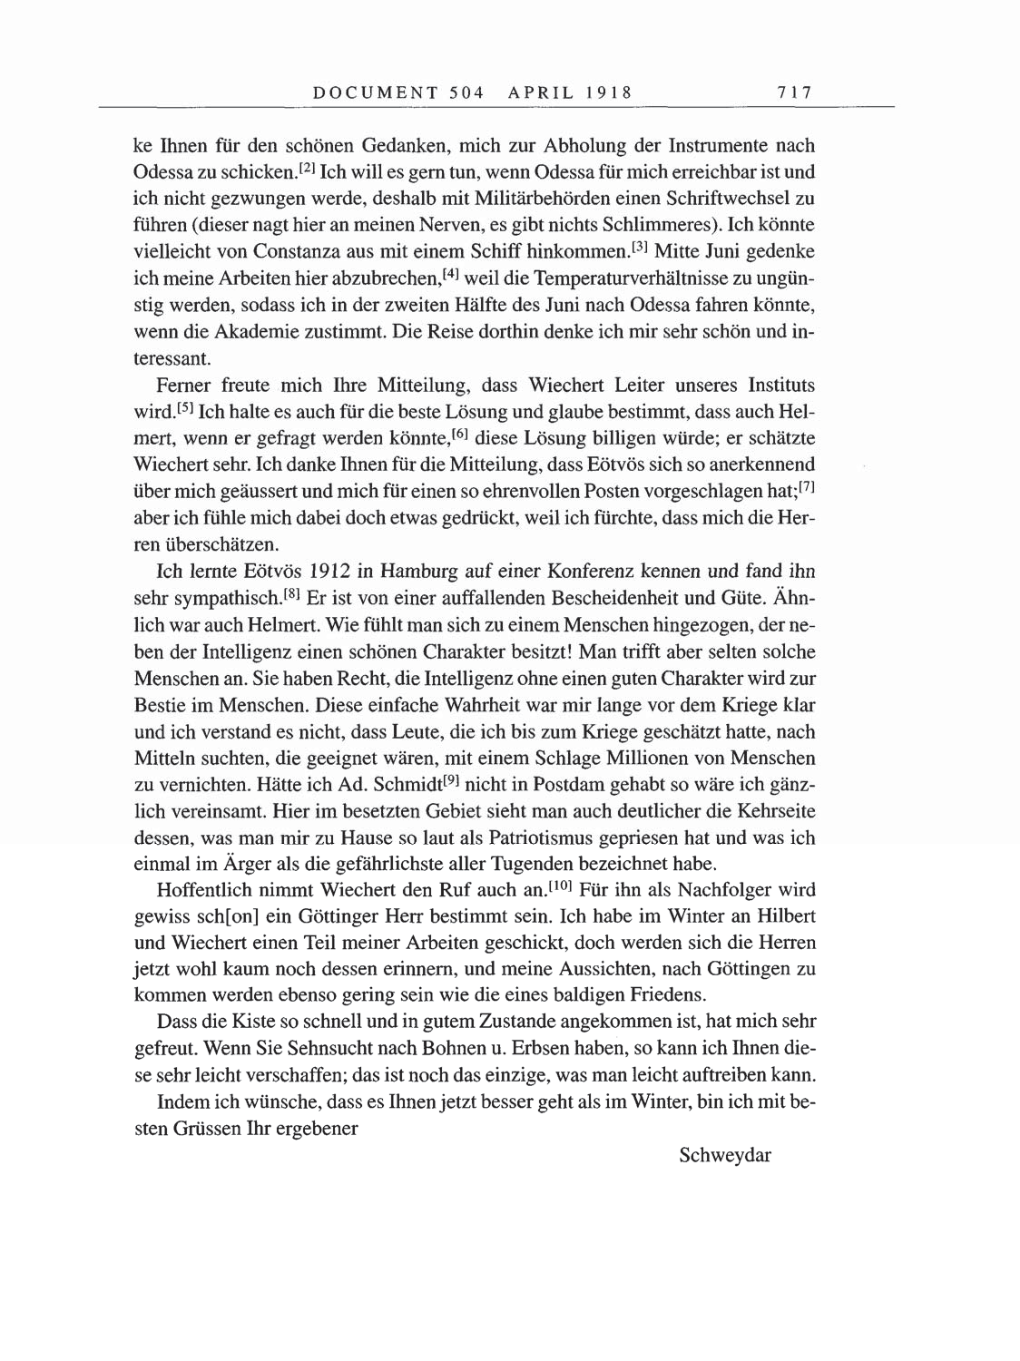 Volume 8, Part B: The Berlin Years: Correspondence 1918 page 717